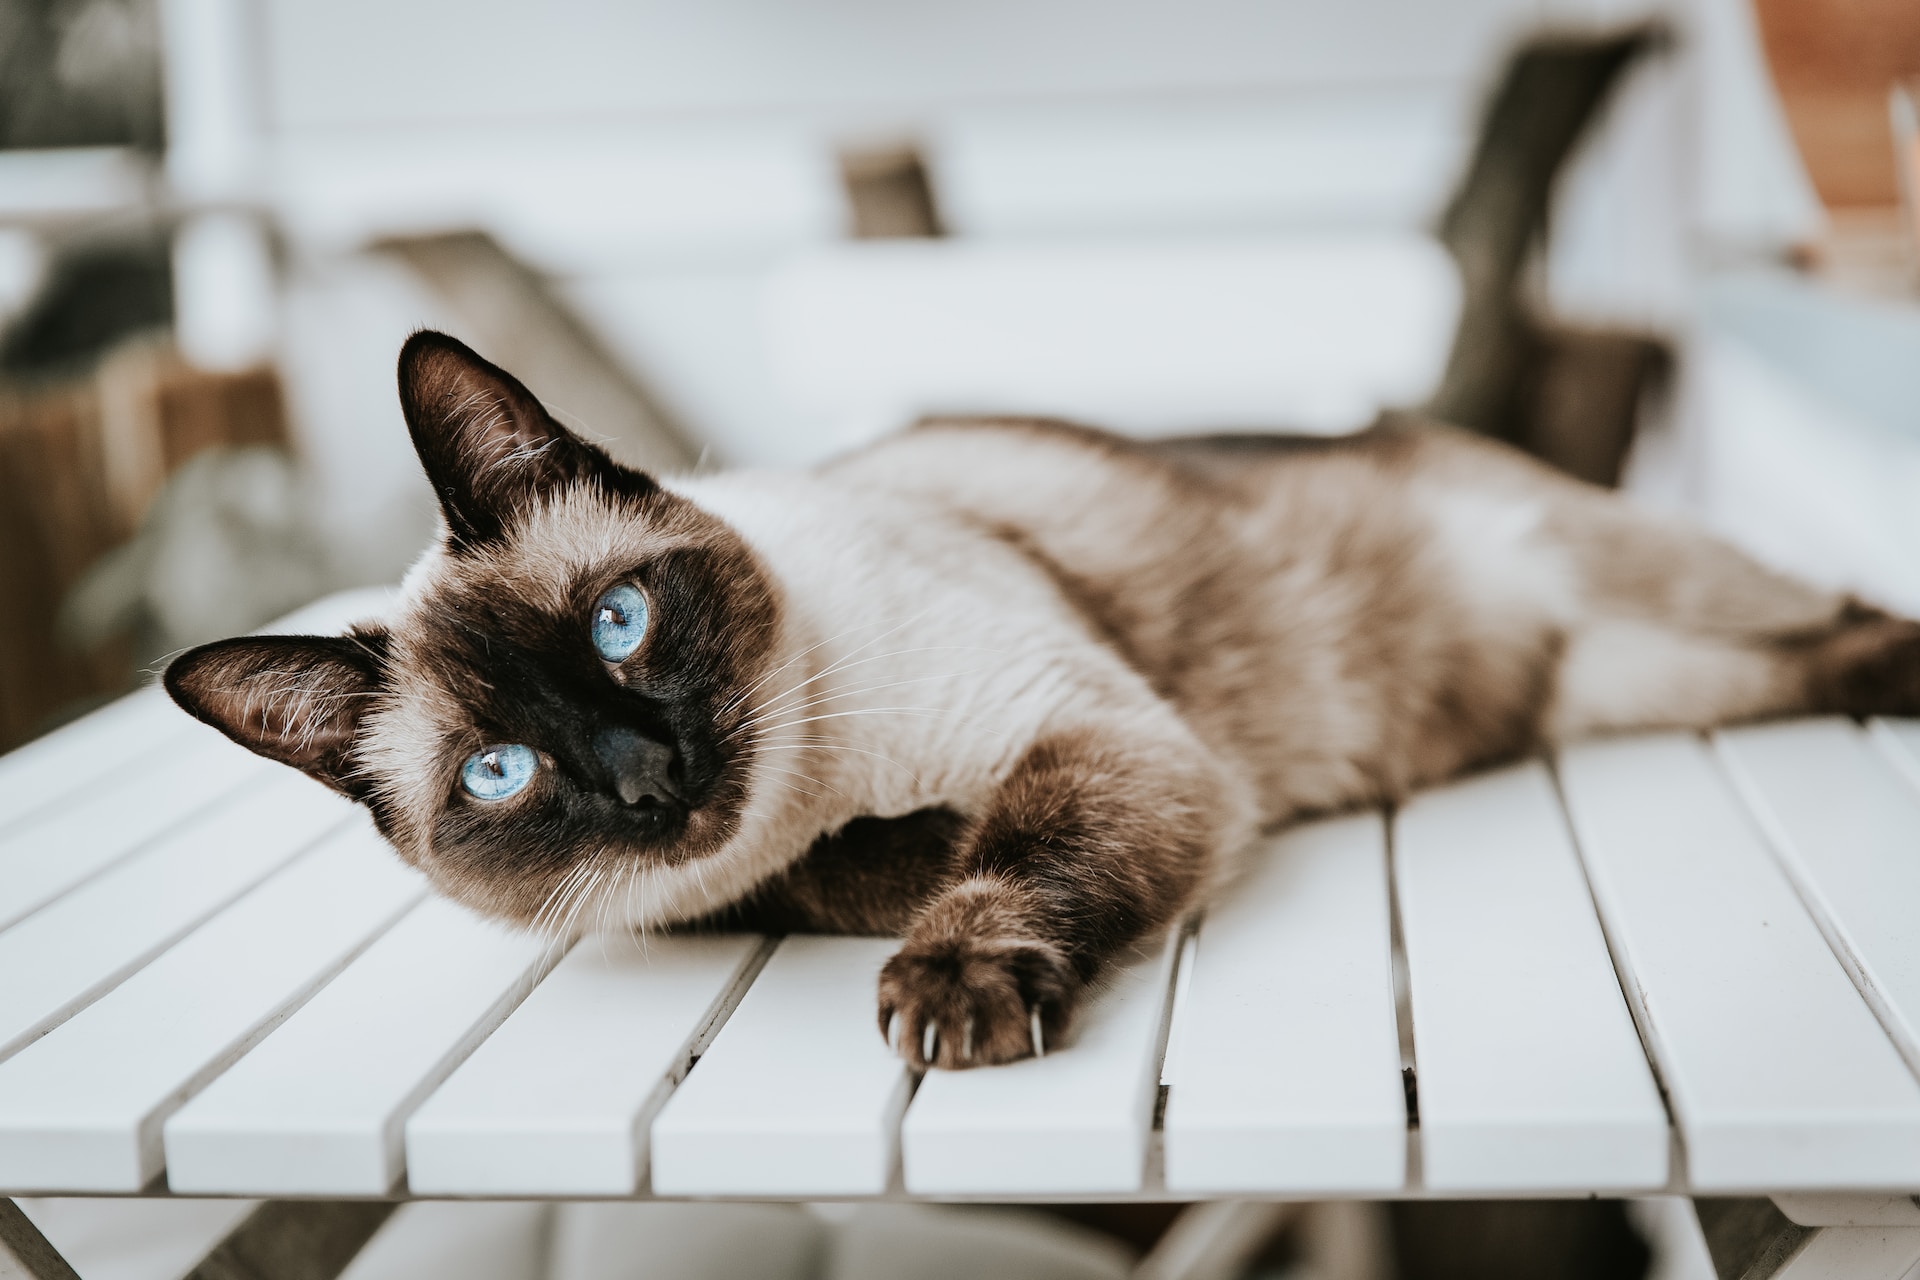 A Siamese cat lying on a white table